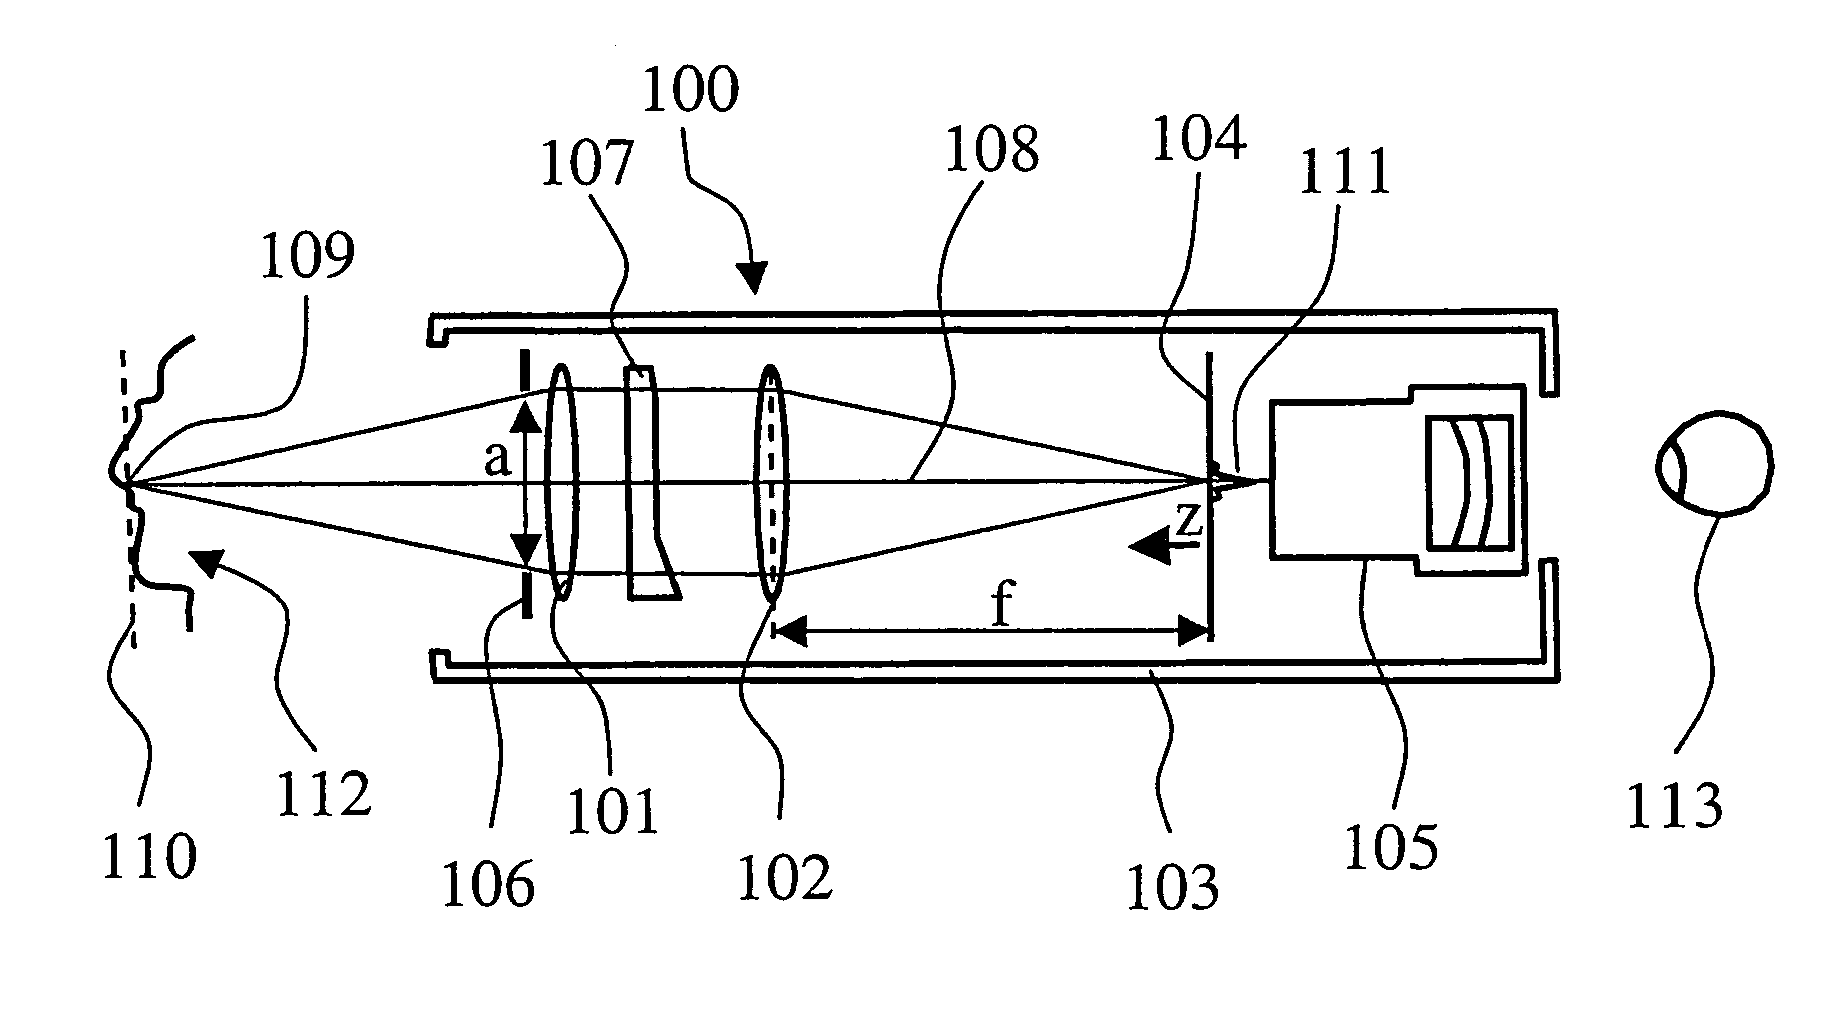 Optical imaging system having an expand depth of field